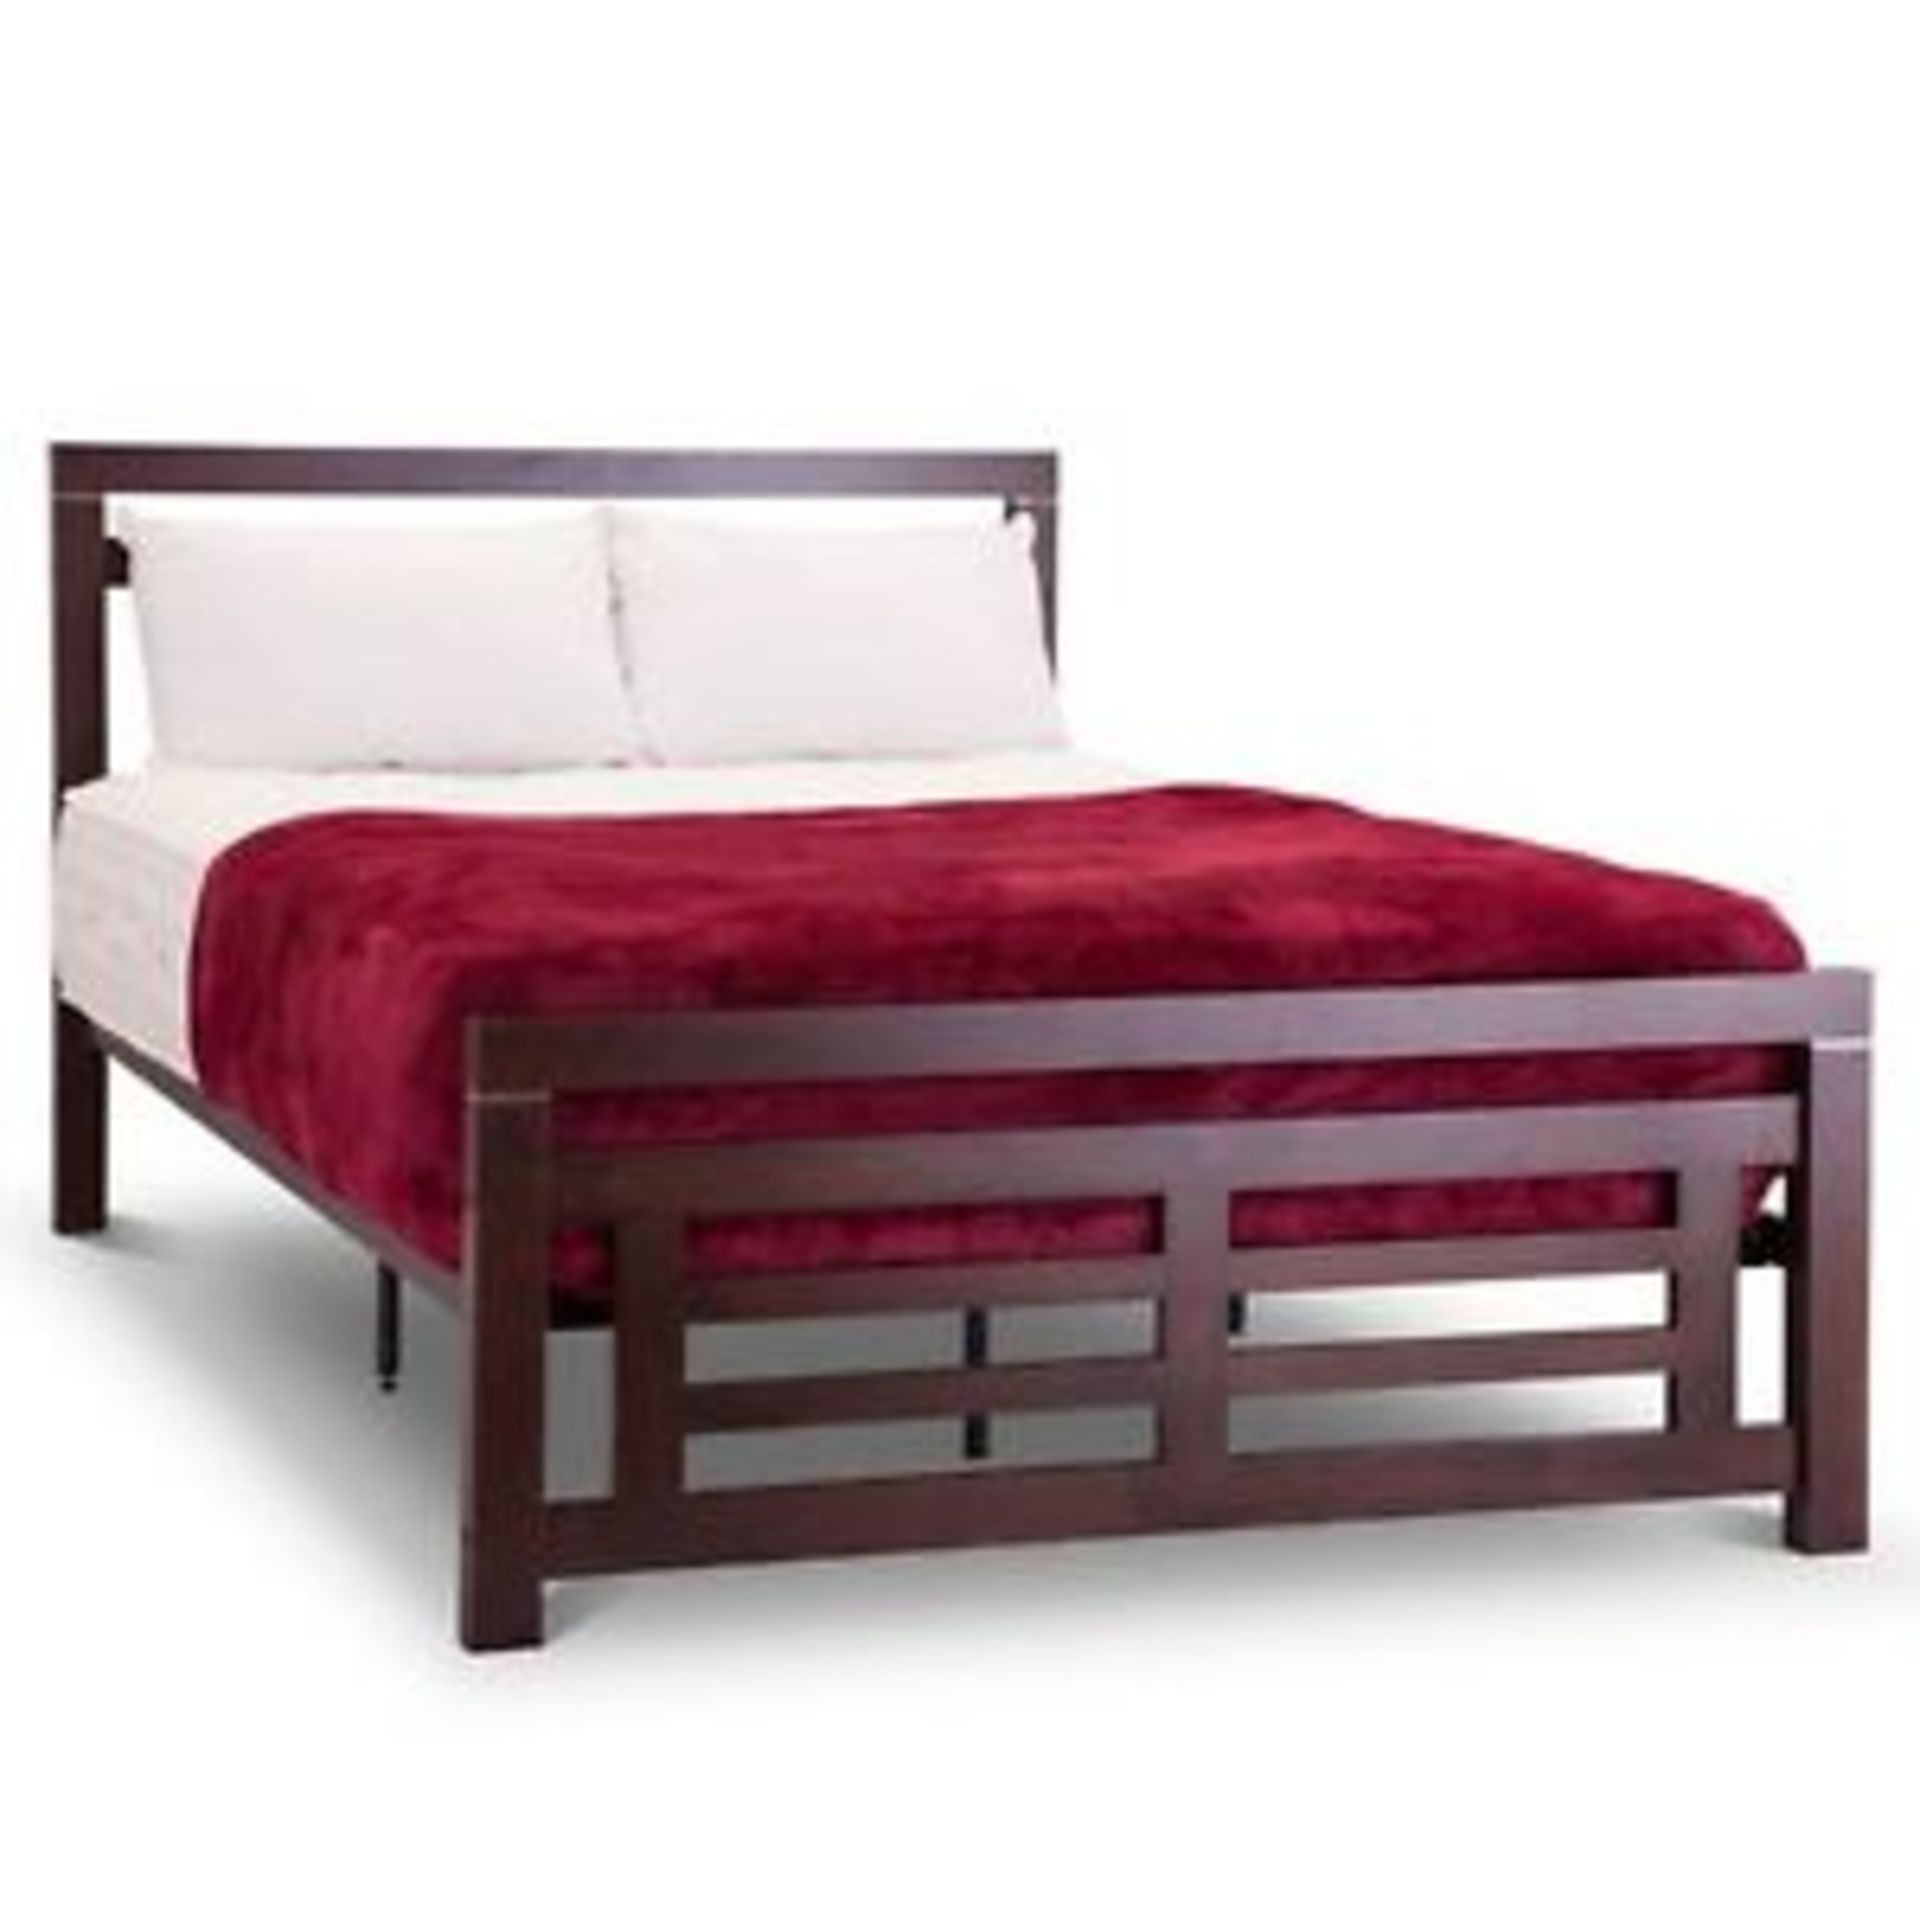 1 BRAND NEW BOXED COLORADO WENGE 5FT KINGSIZE BED